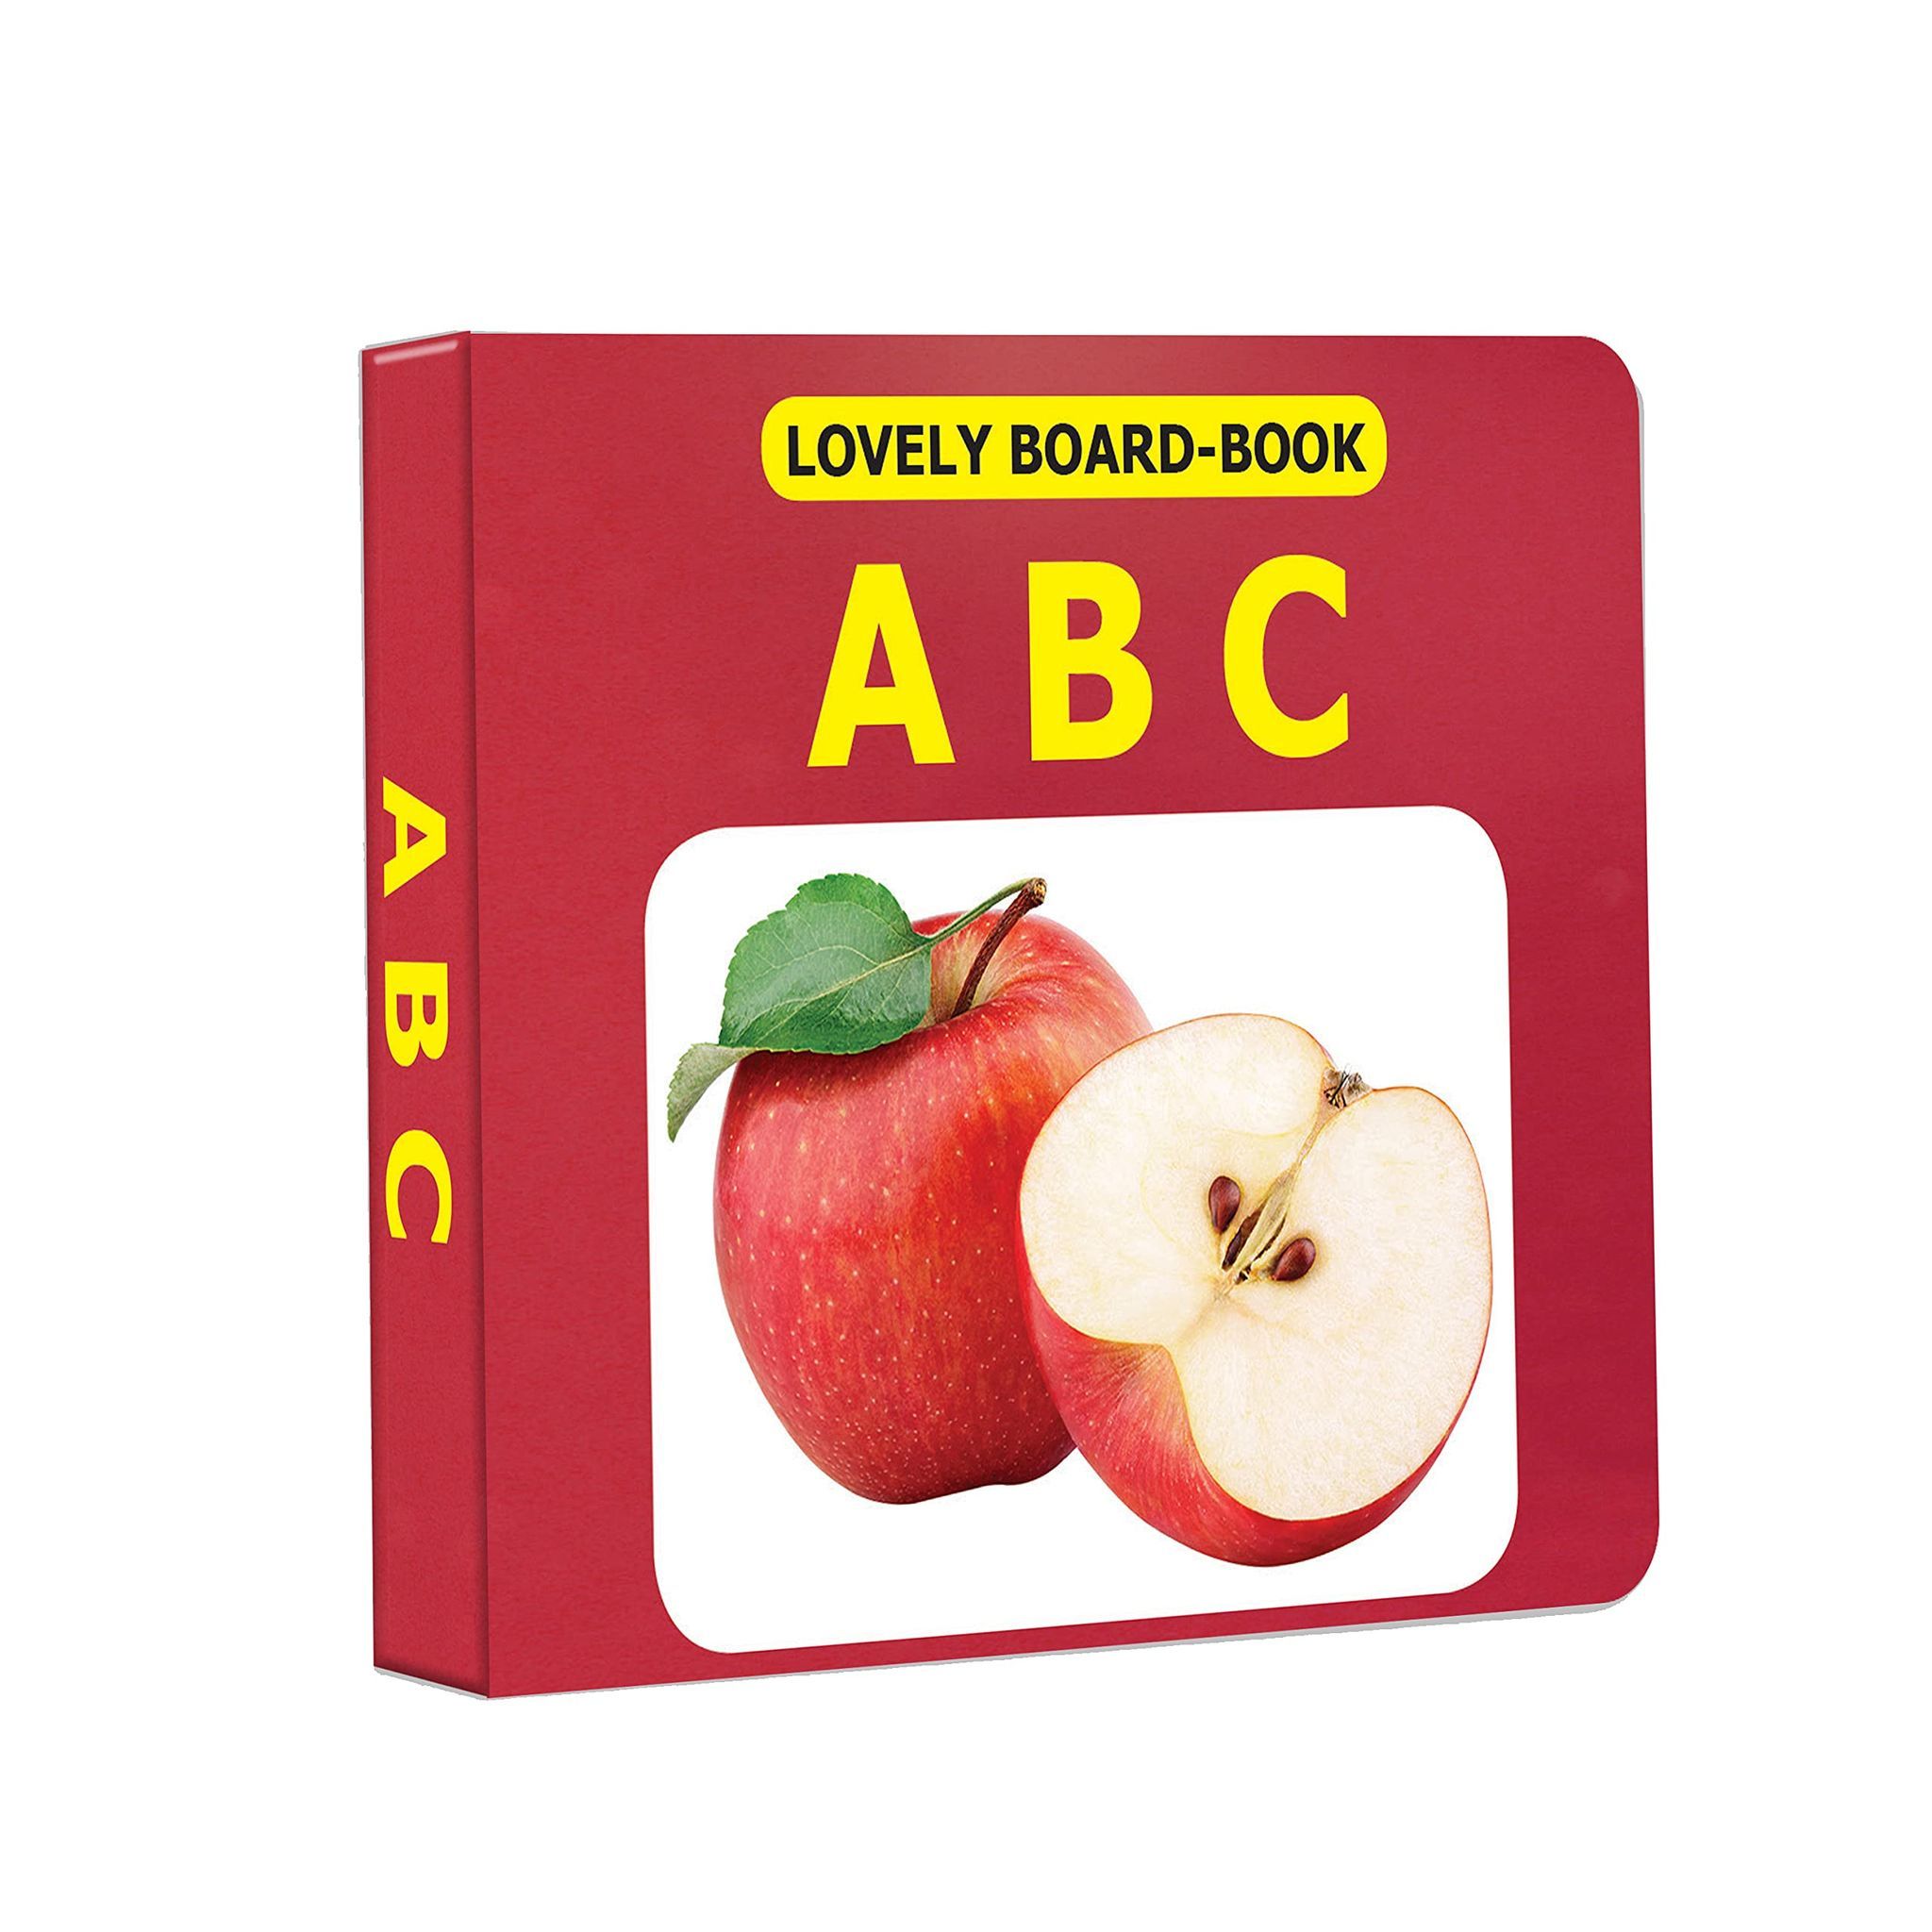 ABC Board Book for Kids Age 0-2 Years Picture Book to Learn Alphabet [Board book] Dreamland Publications